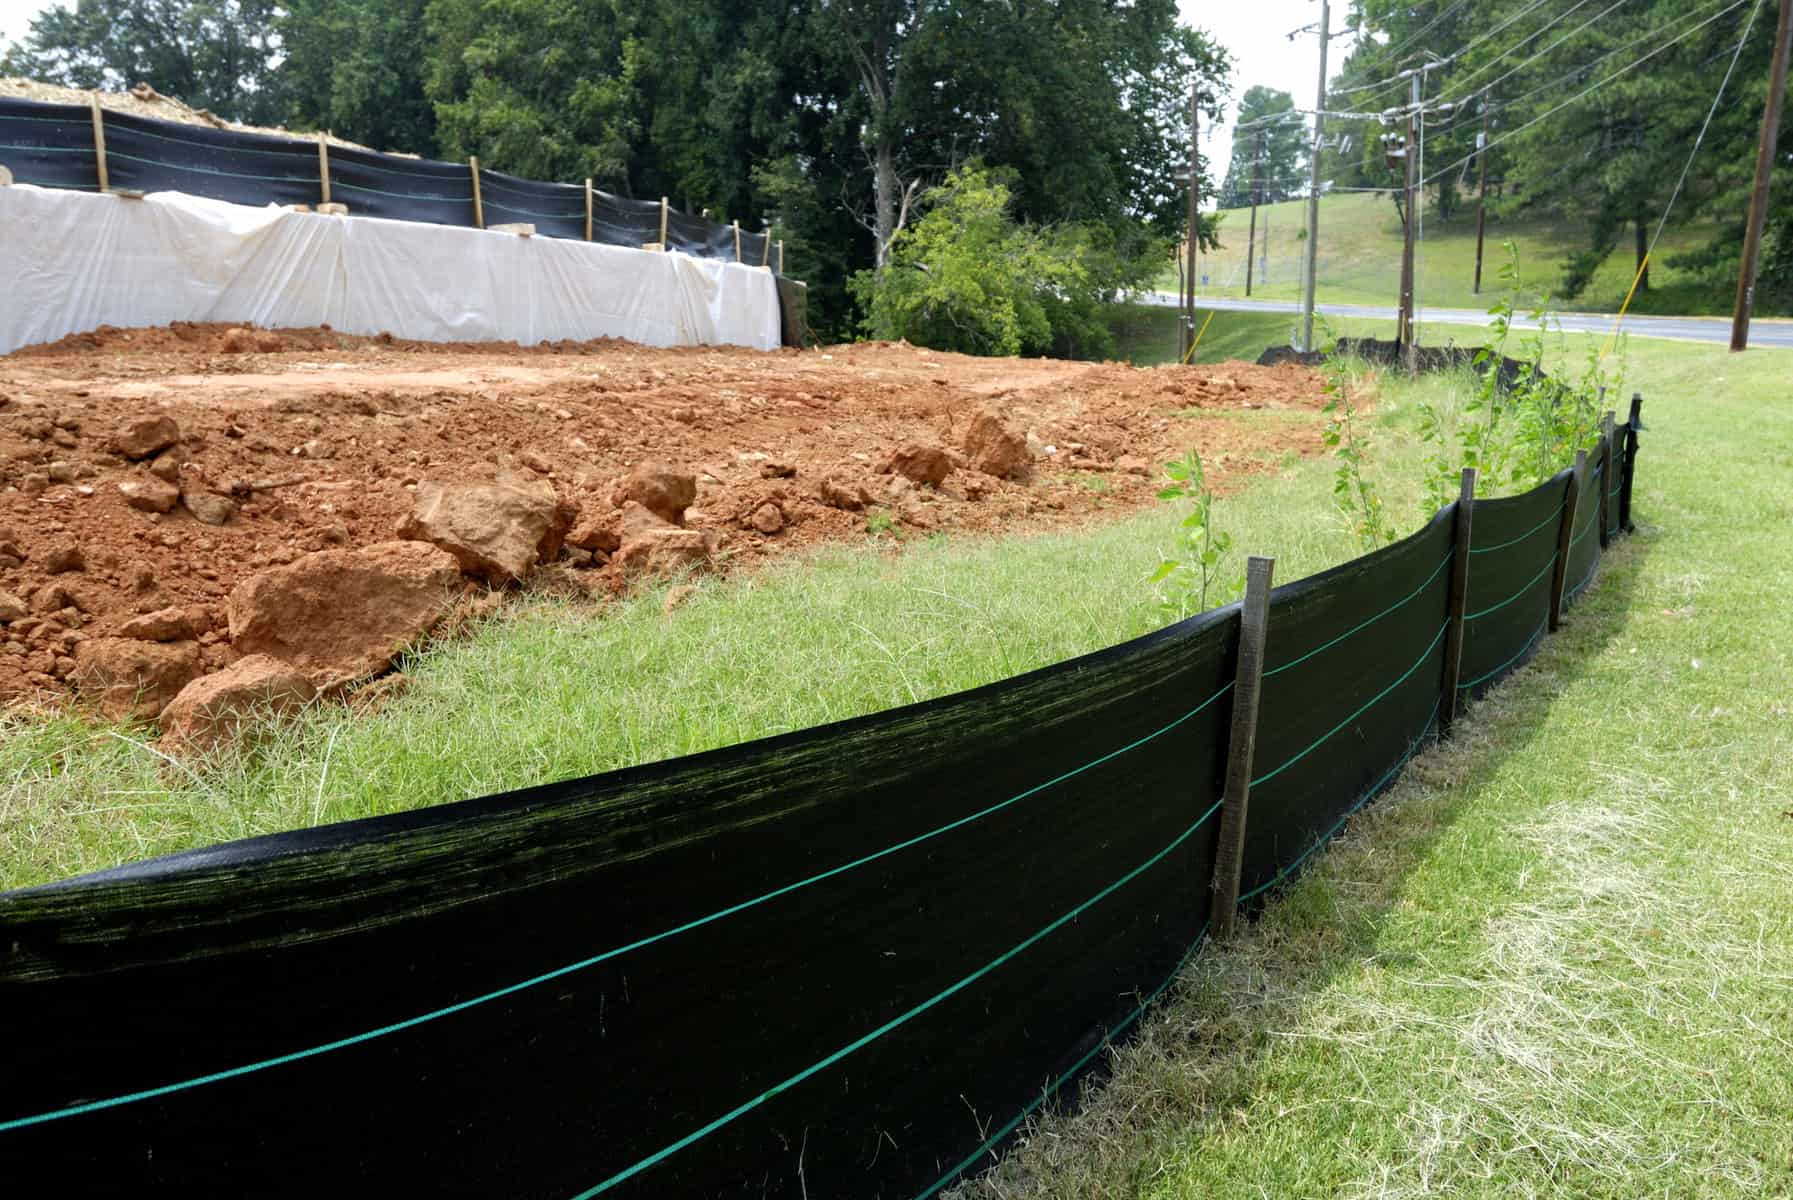 Close-up view of silt fencing at construction site with bare dirt from grading in background